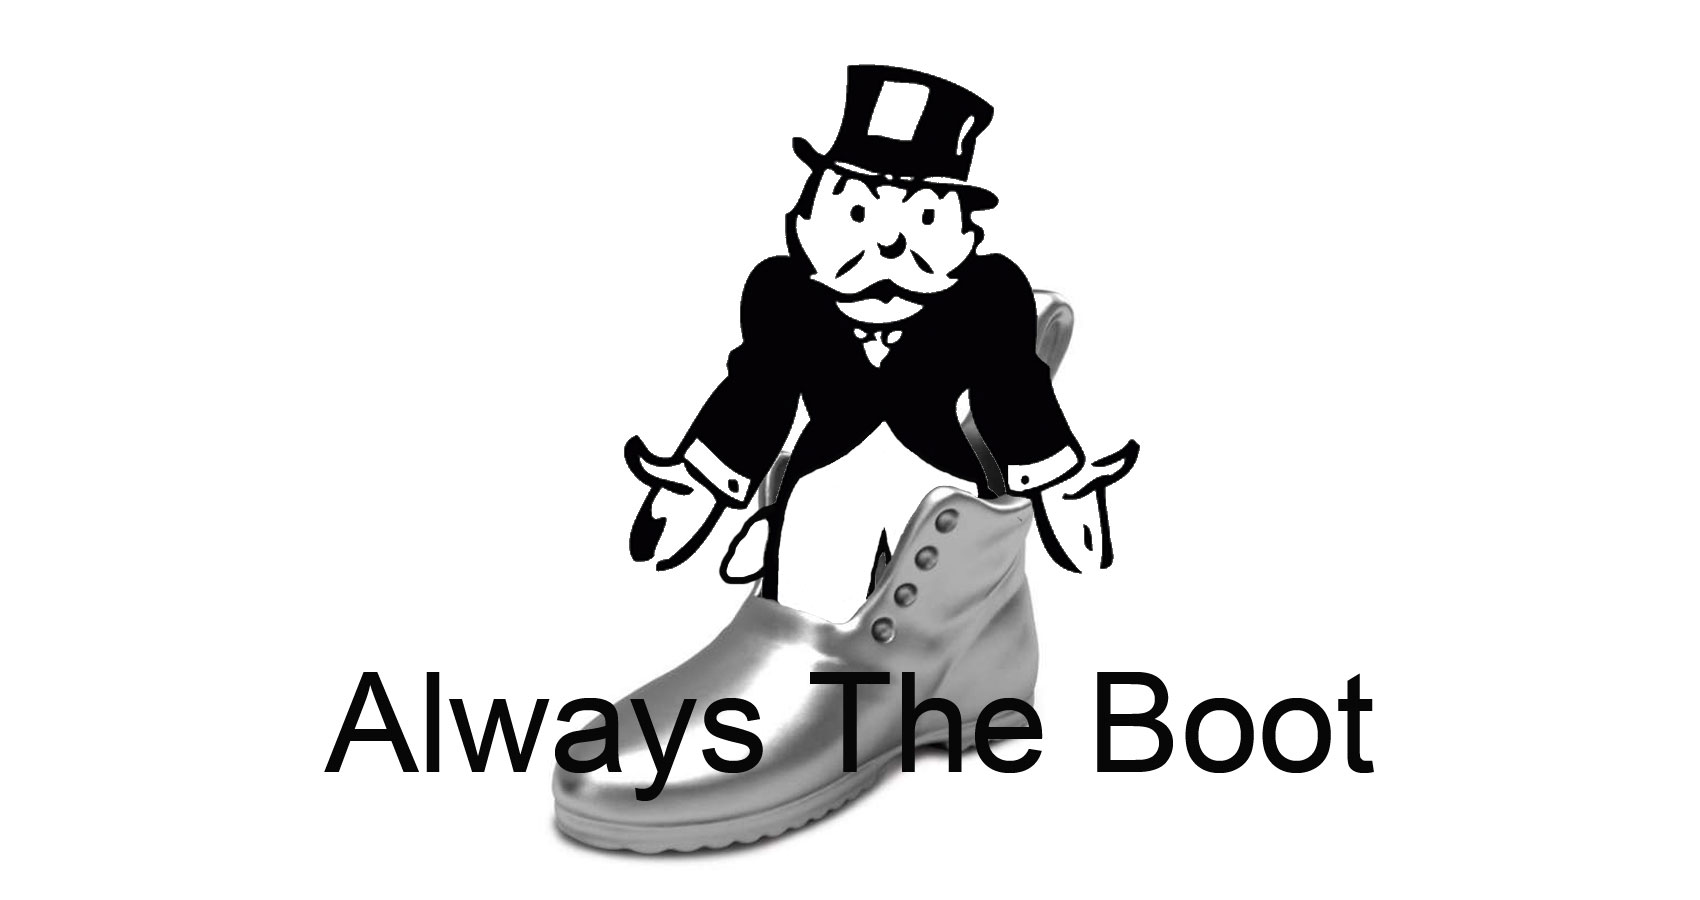 Always The Boot written by Alan Mitnick at Spillwords.com